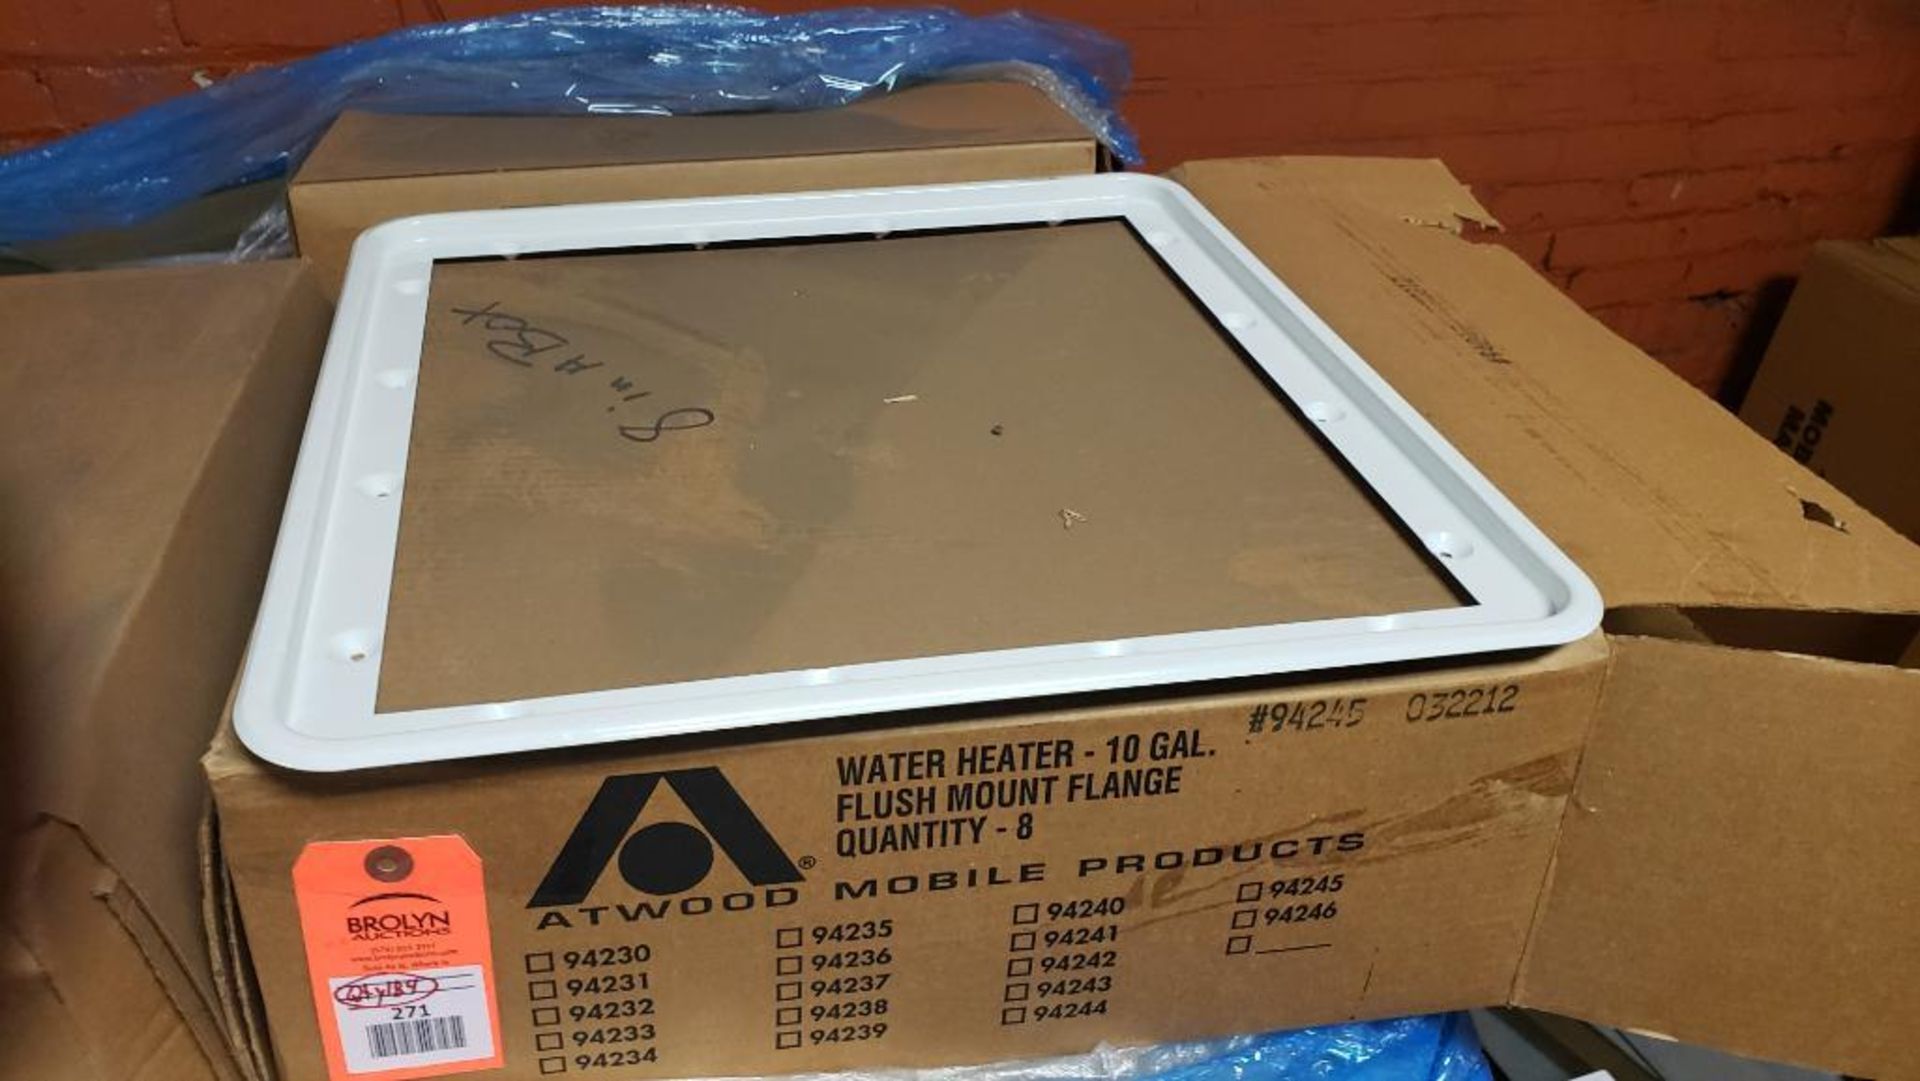 Qty 184 - Atwood Products 10 gallon water heater mount flange. New in bulk boxes.